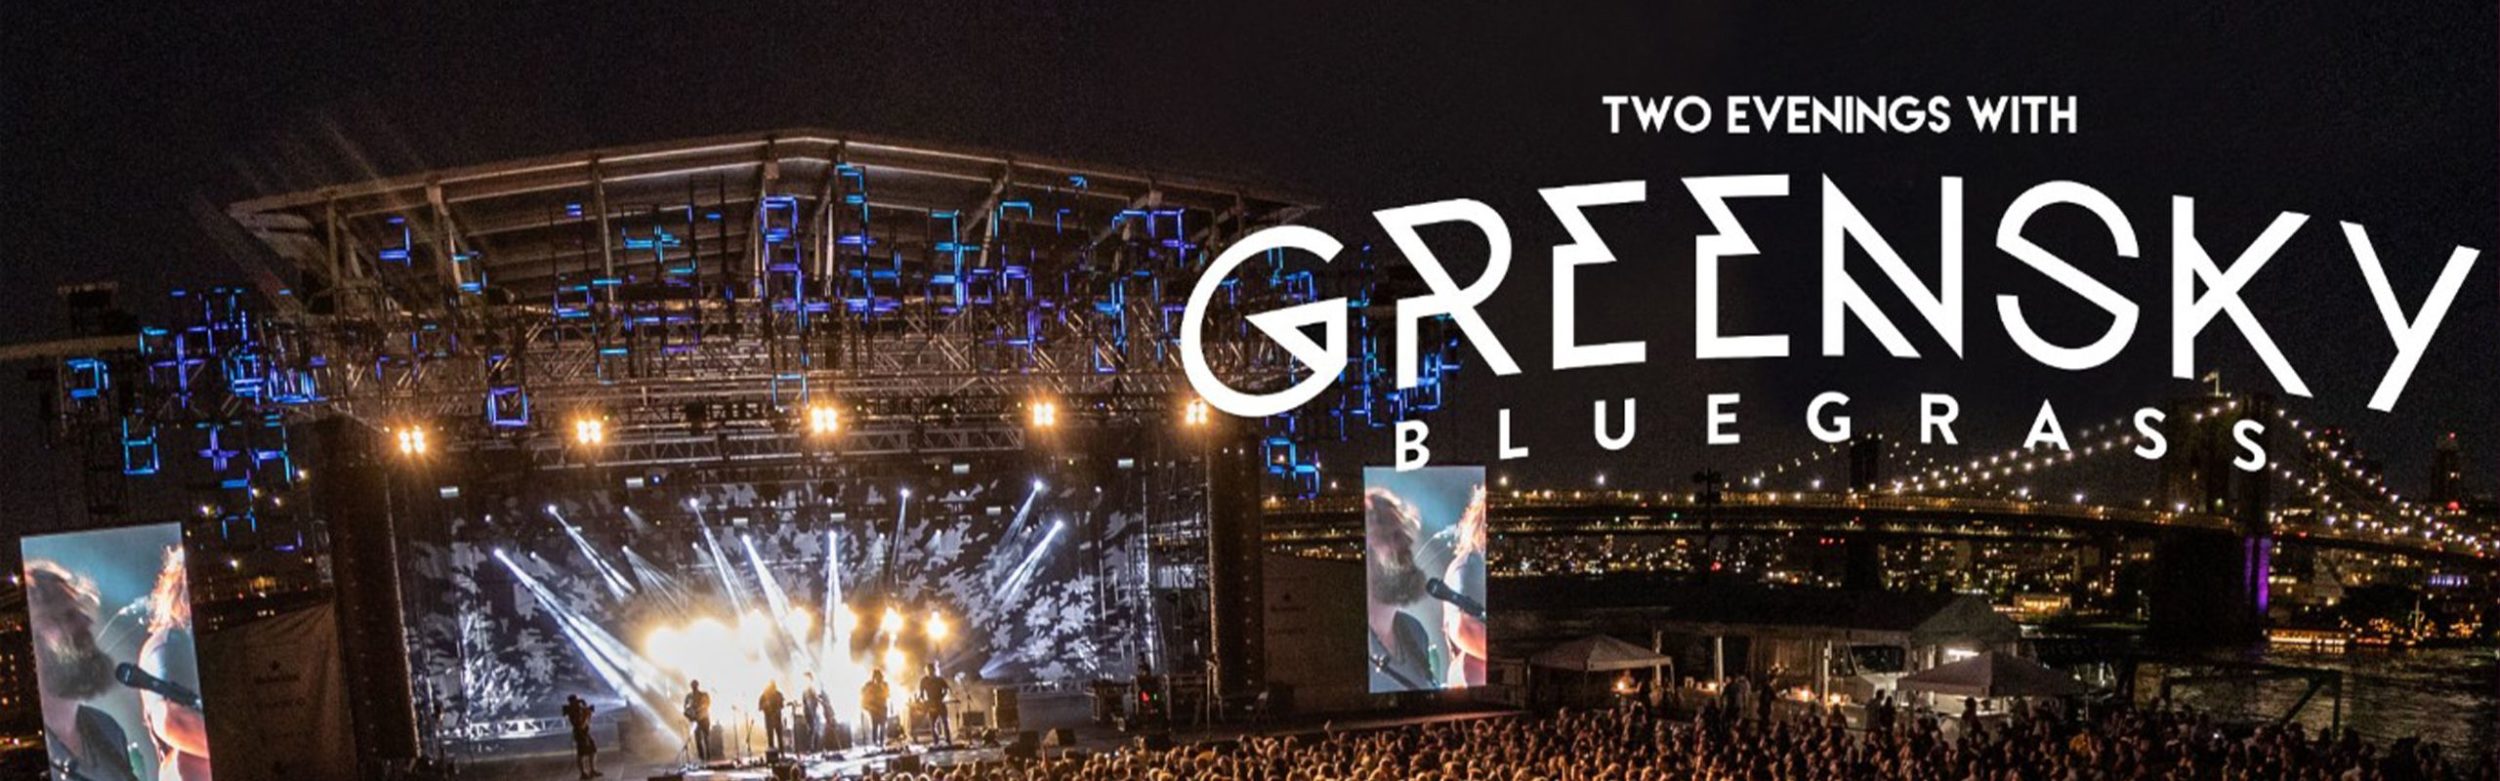 Two Evenings With Greensky Bluegrass